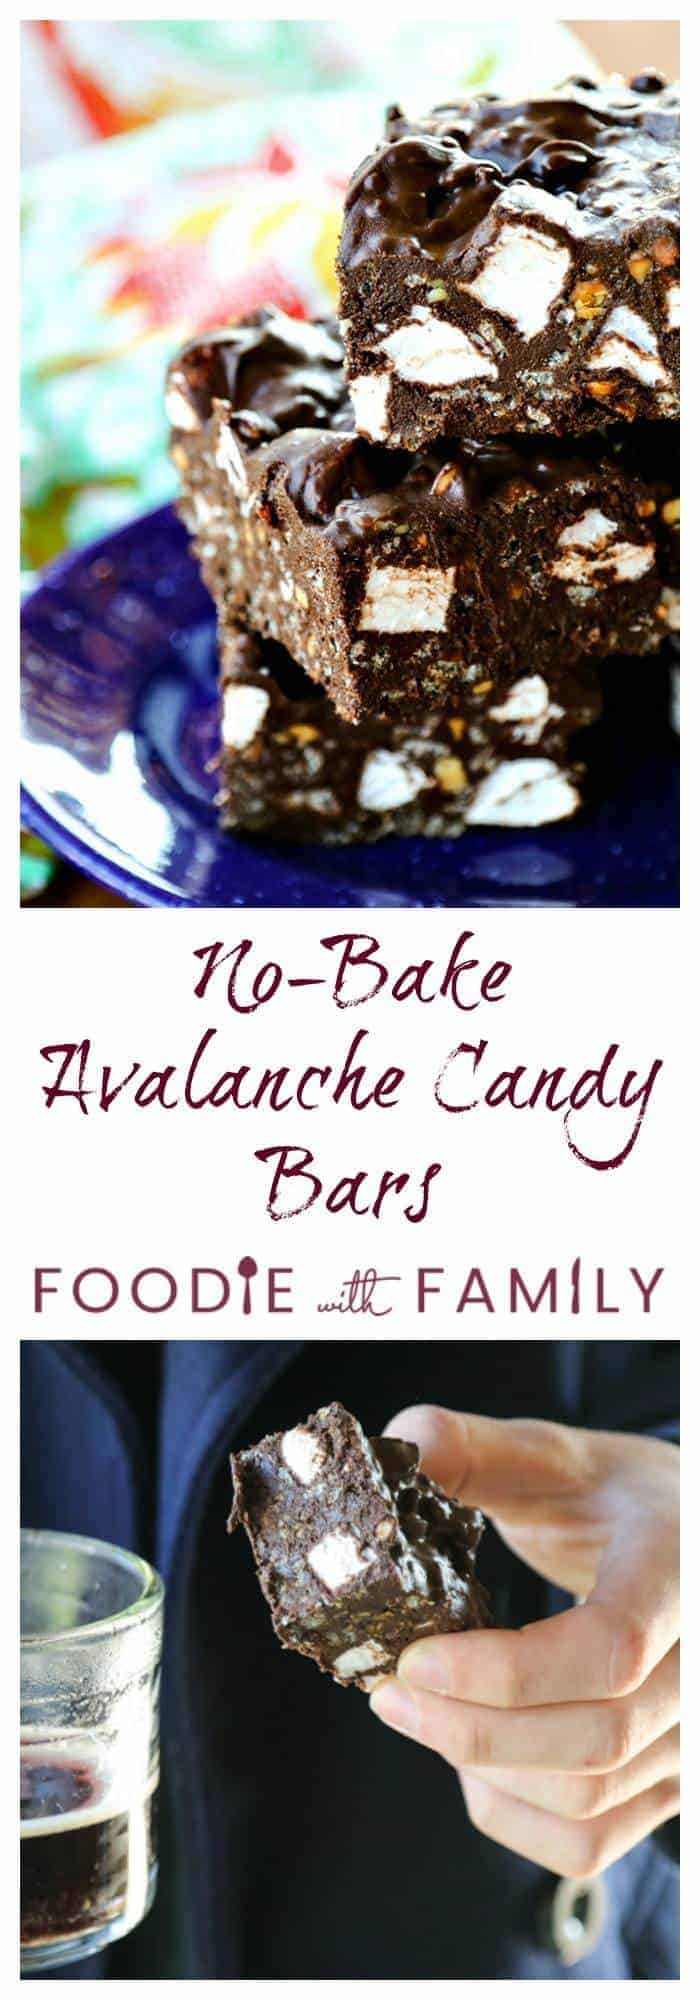 No-Bake Avalanche Candy Bars are chocolate, peanut butter, crispy rice, and fluffy marshmallows in 1 delicious, SIMPLE homemade candy bar.